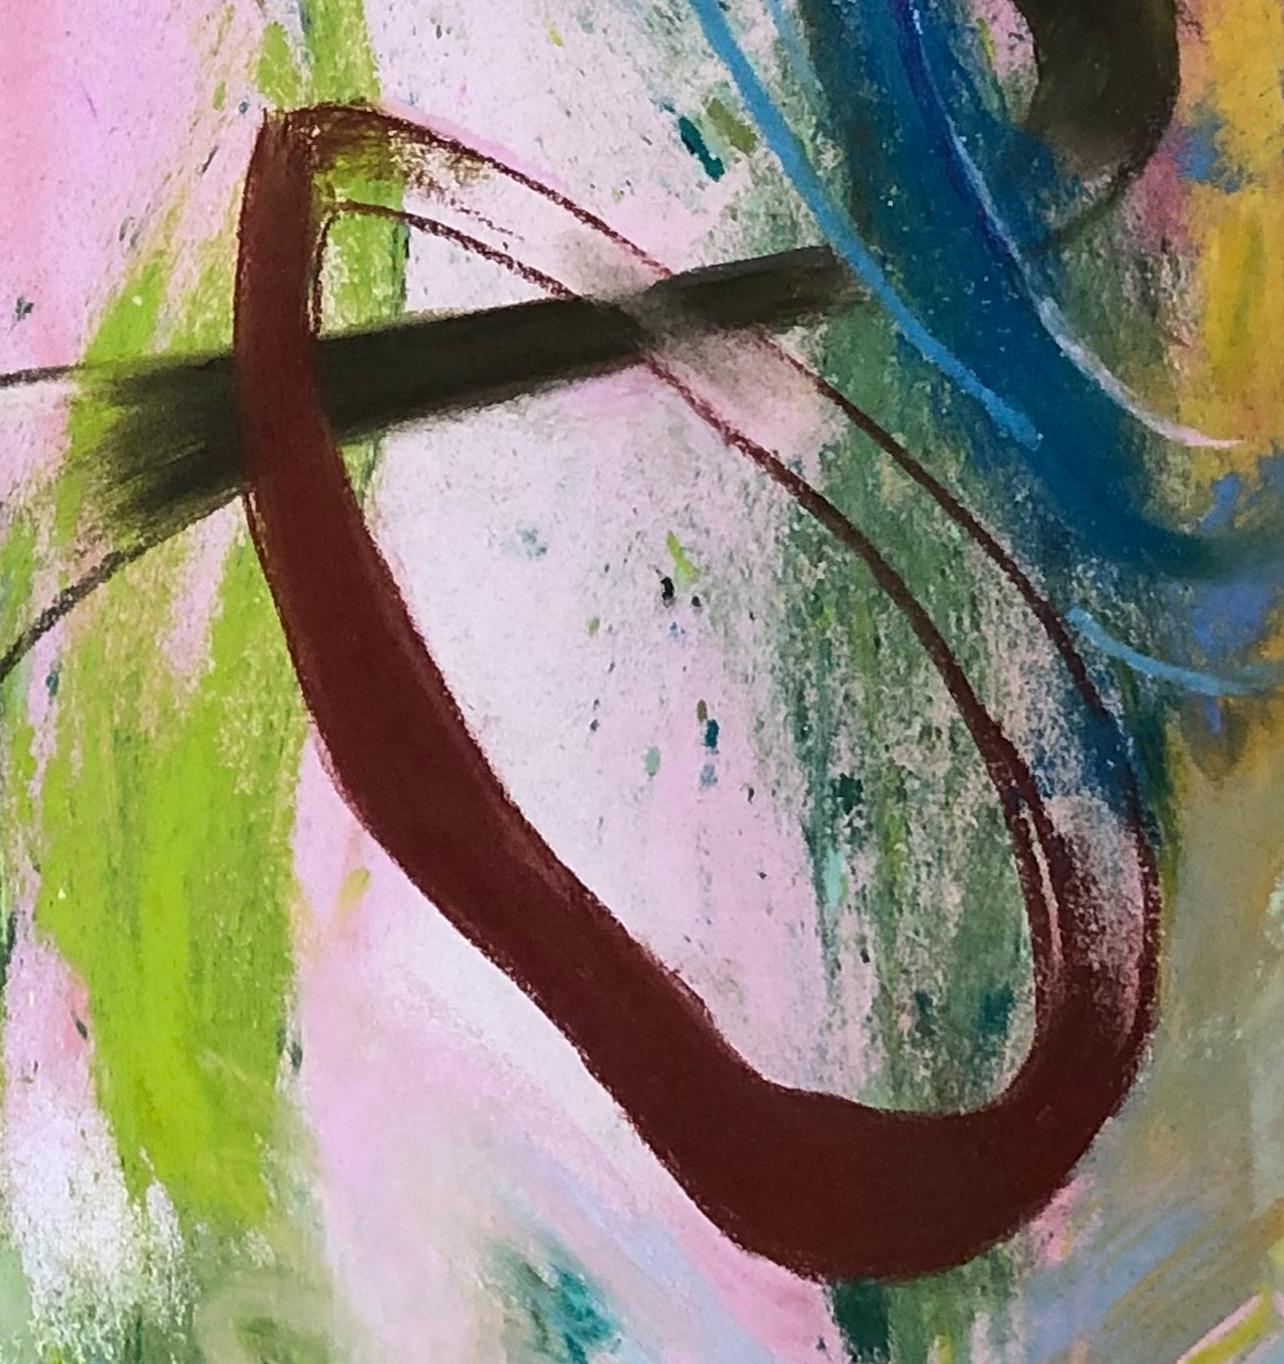 The Wind, a contemporary abstract pastel in glowing pinks, greens, blues is filled with
swirling movement. It explores the space and tension between figuration and abstraction and represents a natural force and an internal life permeated by personal